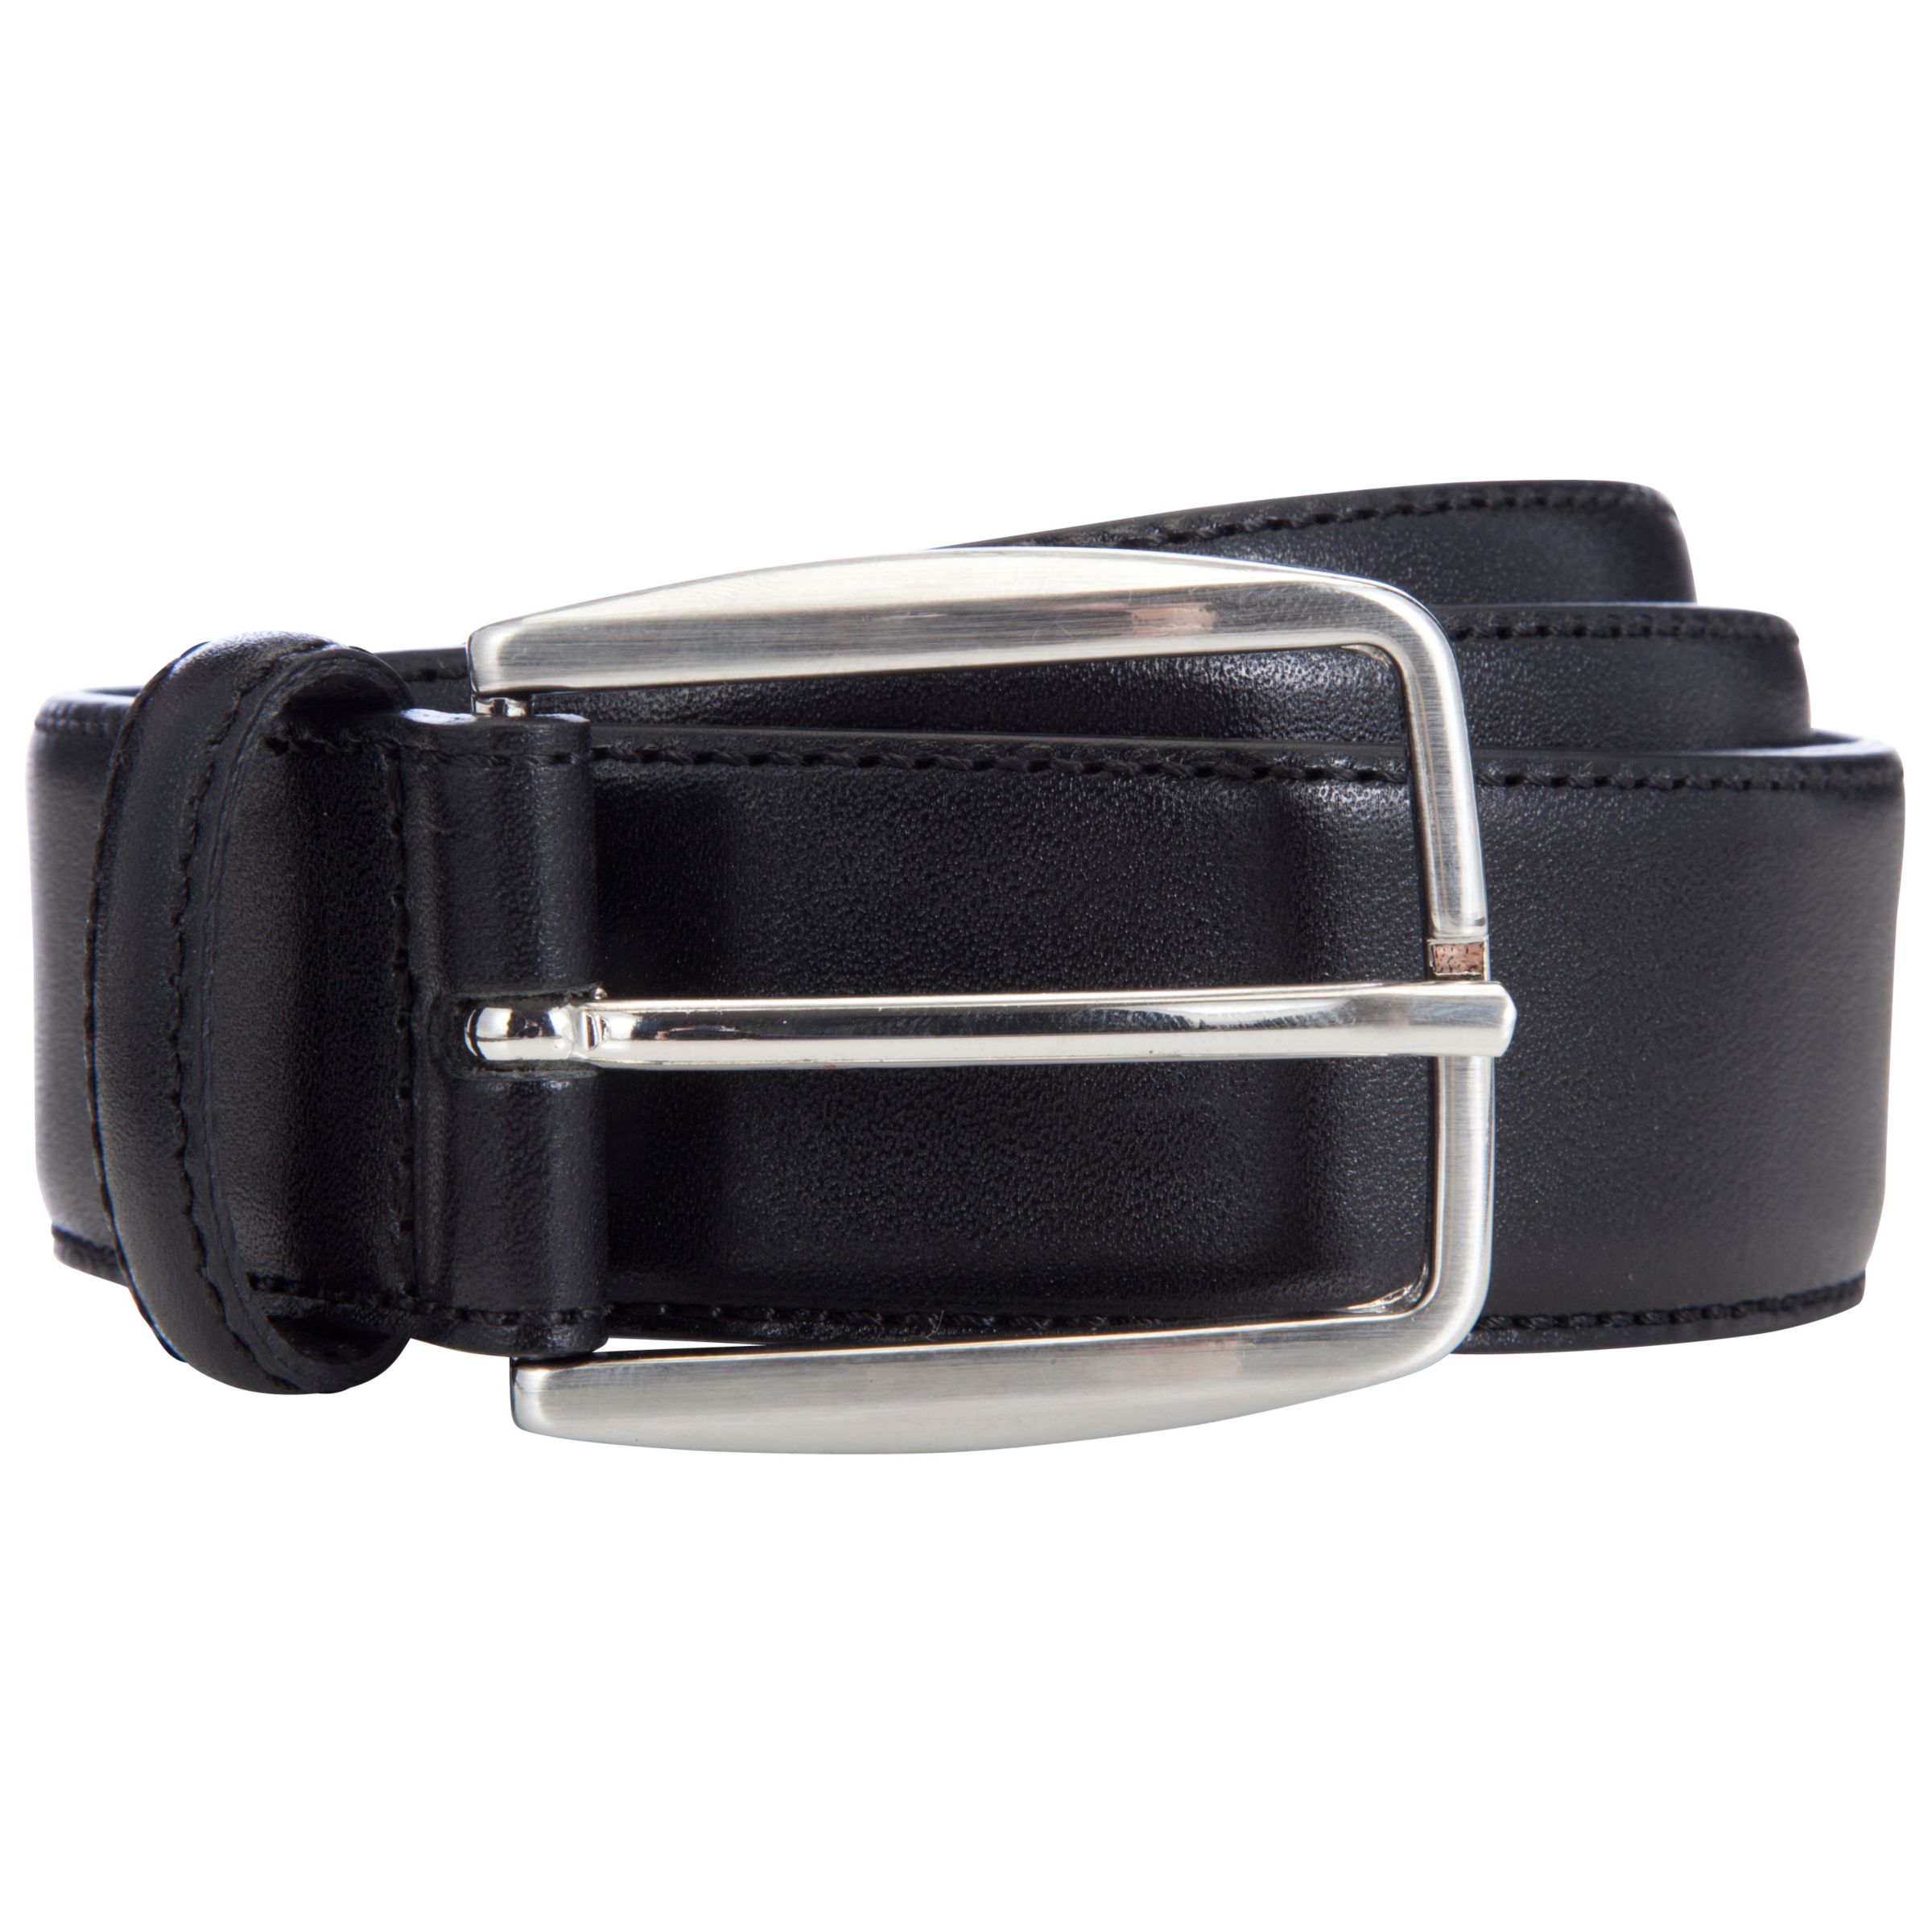 John Lewis & Partners Made in Italy Leather Belt, Black, L